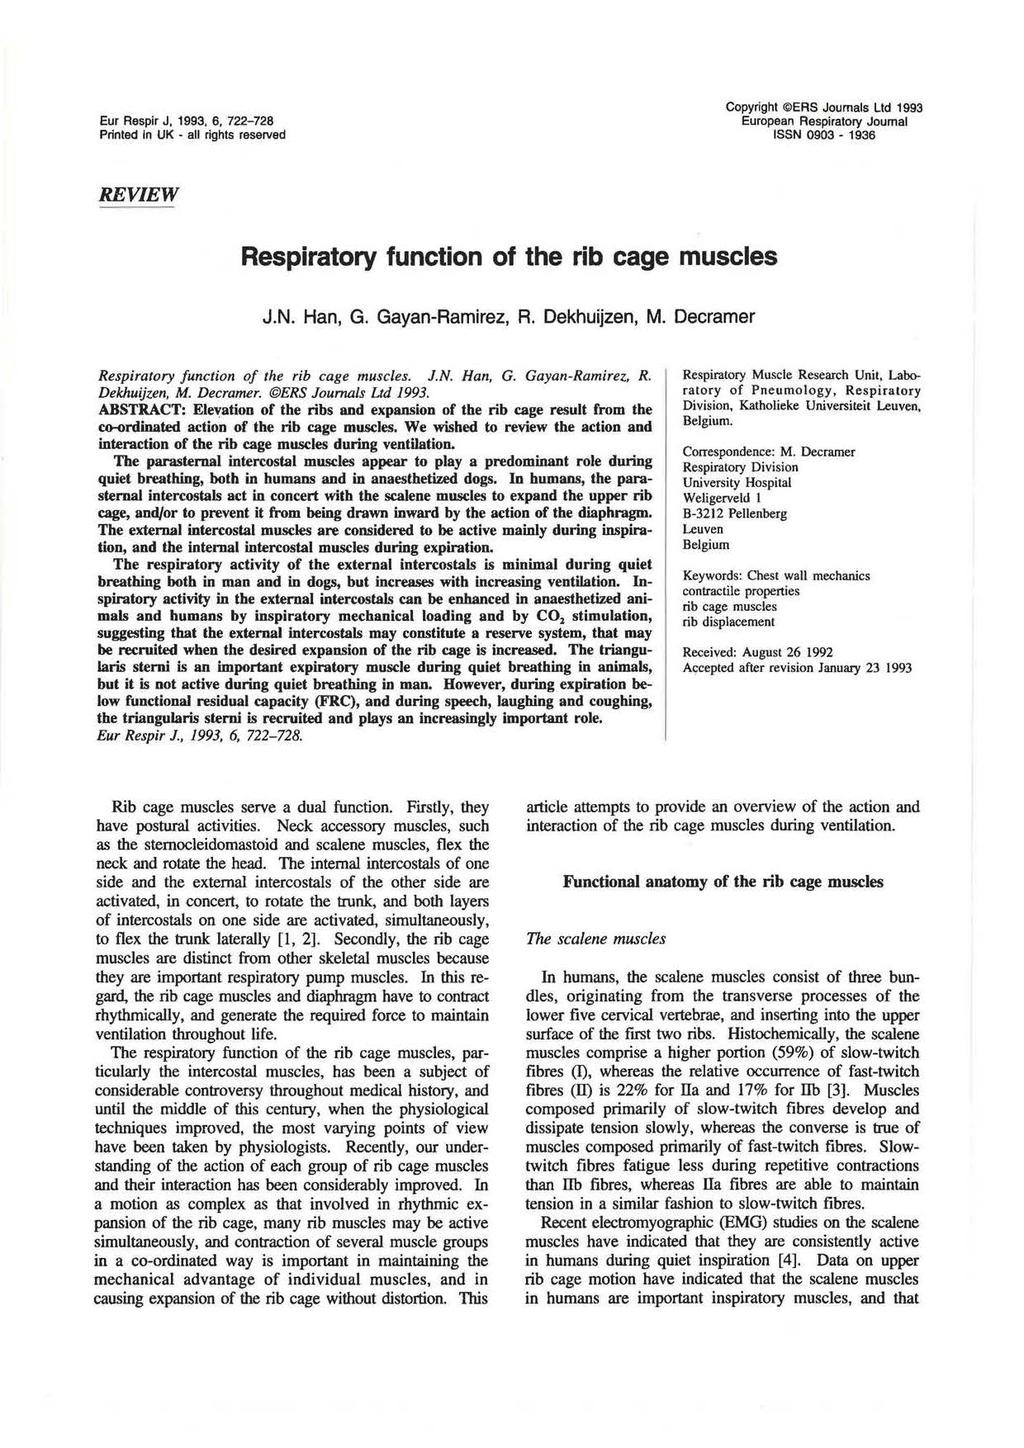 Eur Respir J, 1993, 6, 722-728 Printed In UK all rights reserved Copyright @ERS Journals Ltd 1993 European Respiratory Journal ISSN 0903 1936 REVIEW Respiratory function of the rib cage muscles J.N. Han, G.